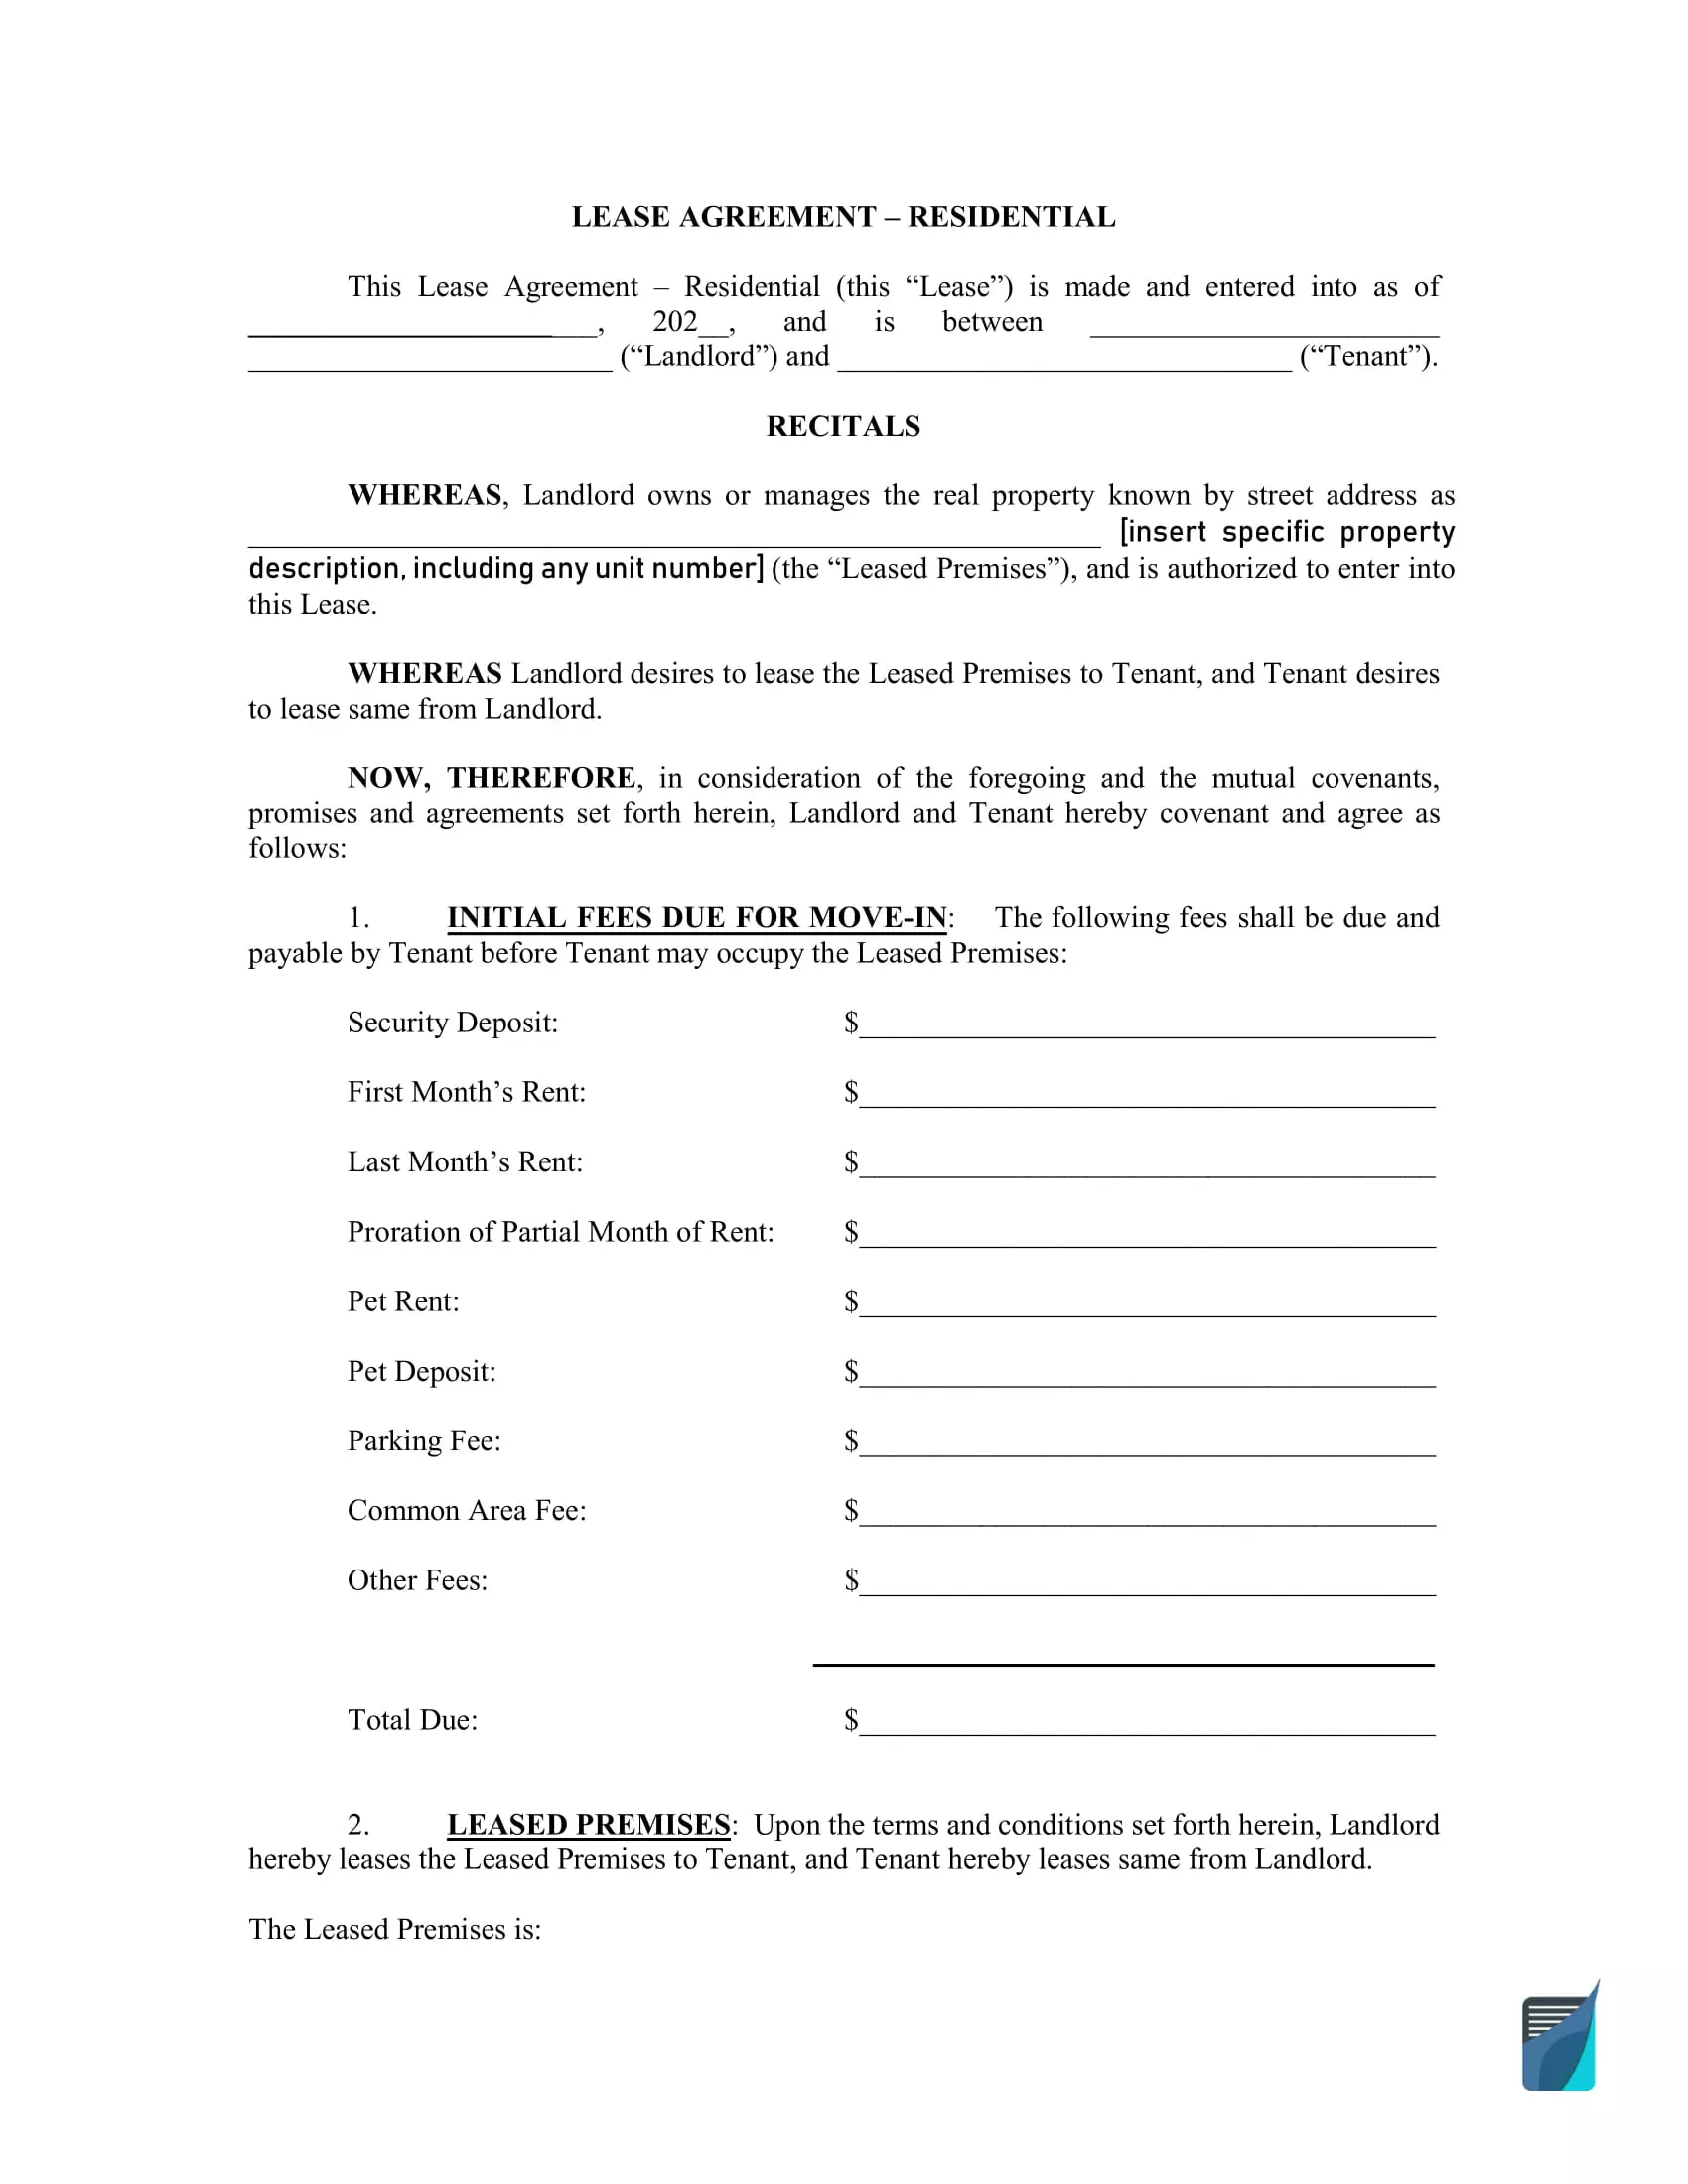 Lease Agreement Residential Form